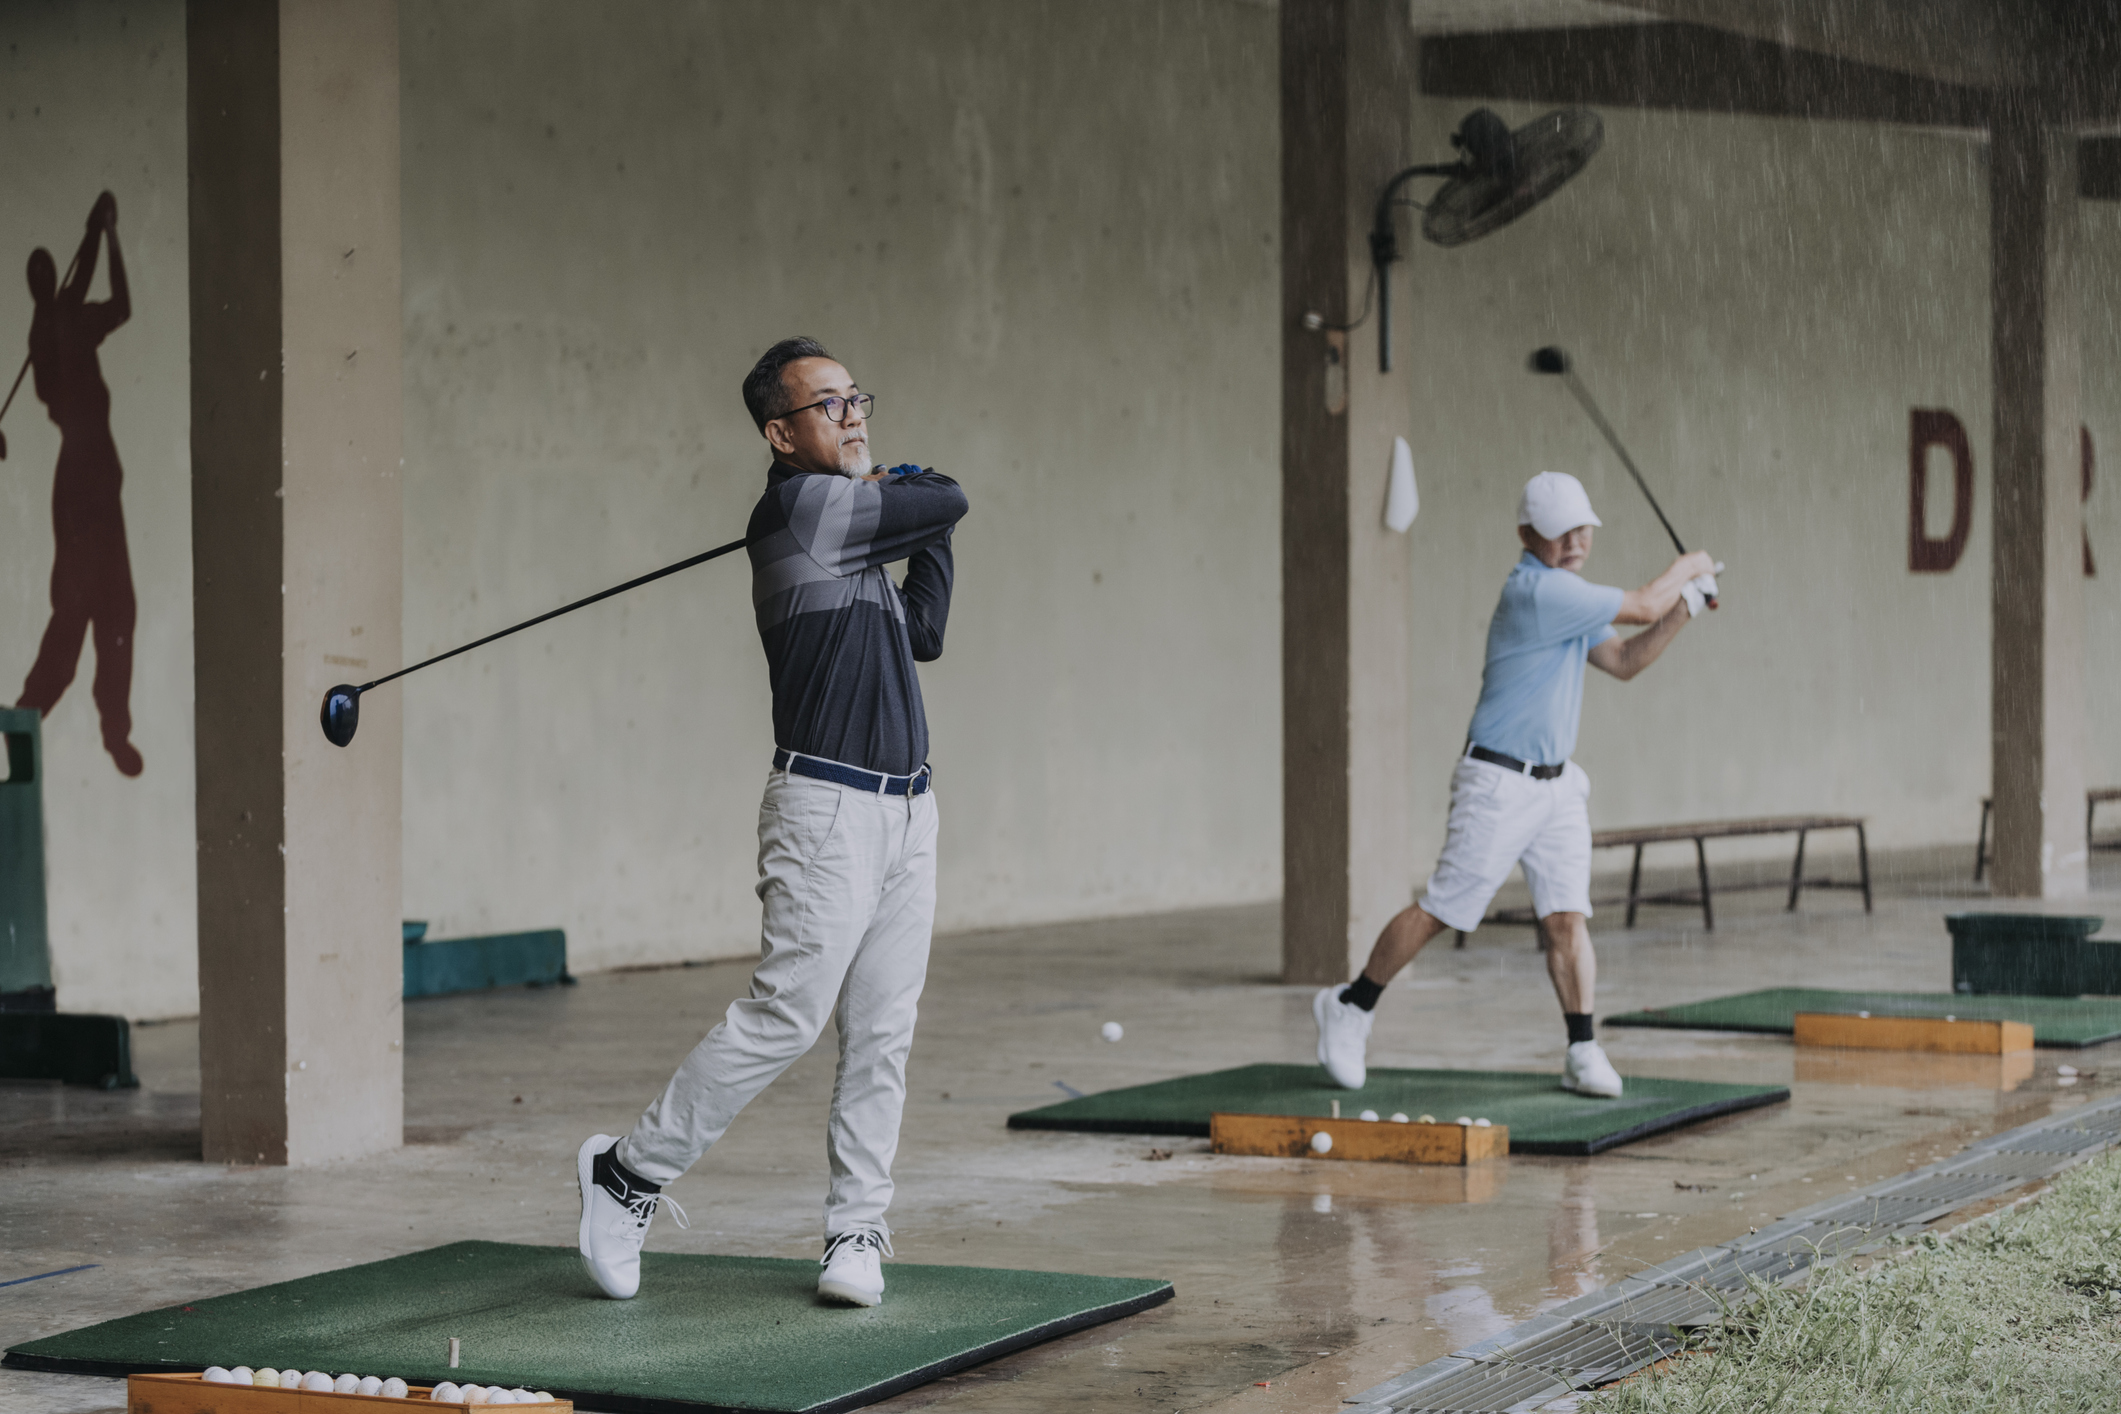 People practicing golf while it's raining outside.